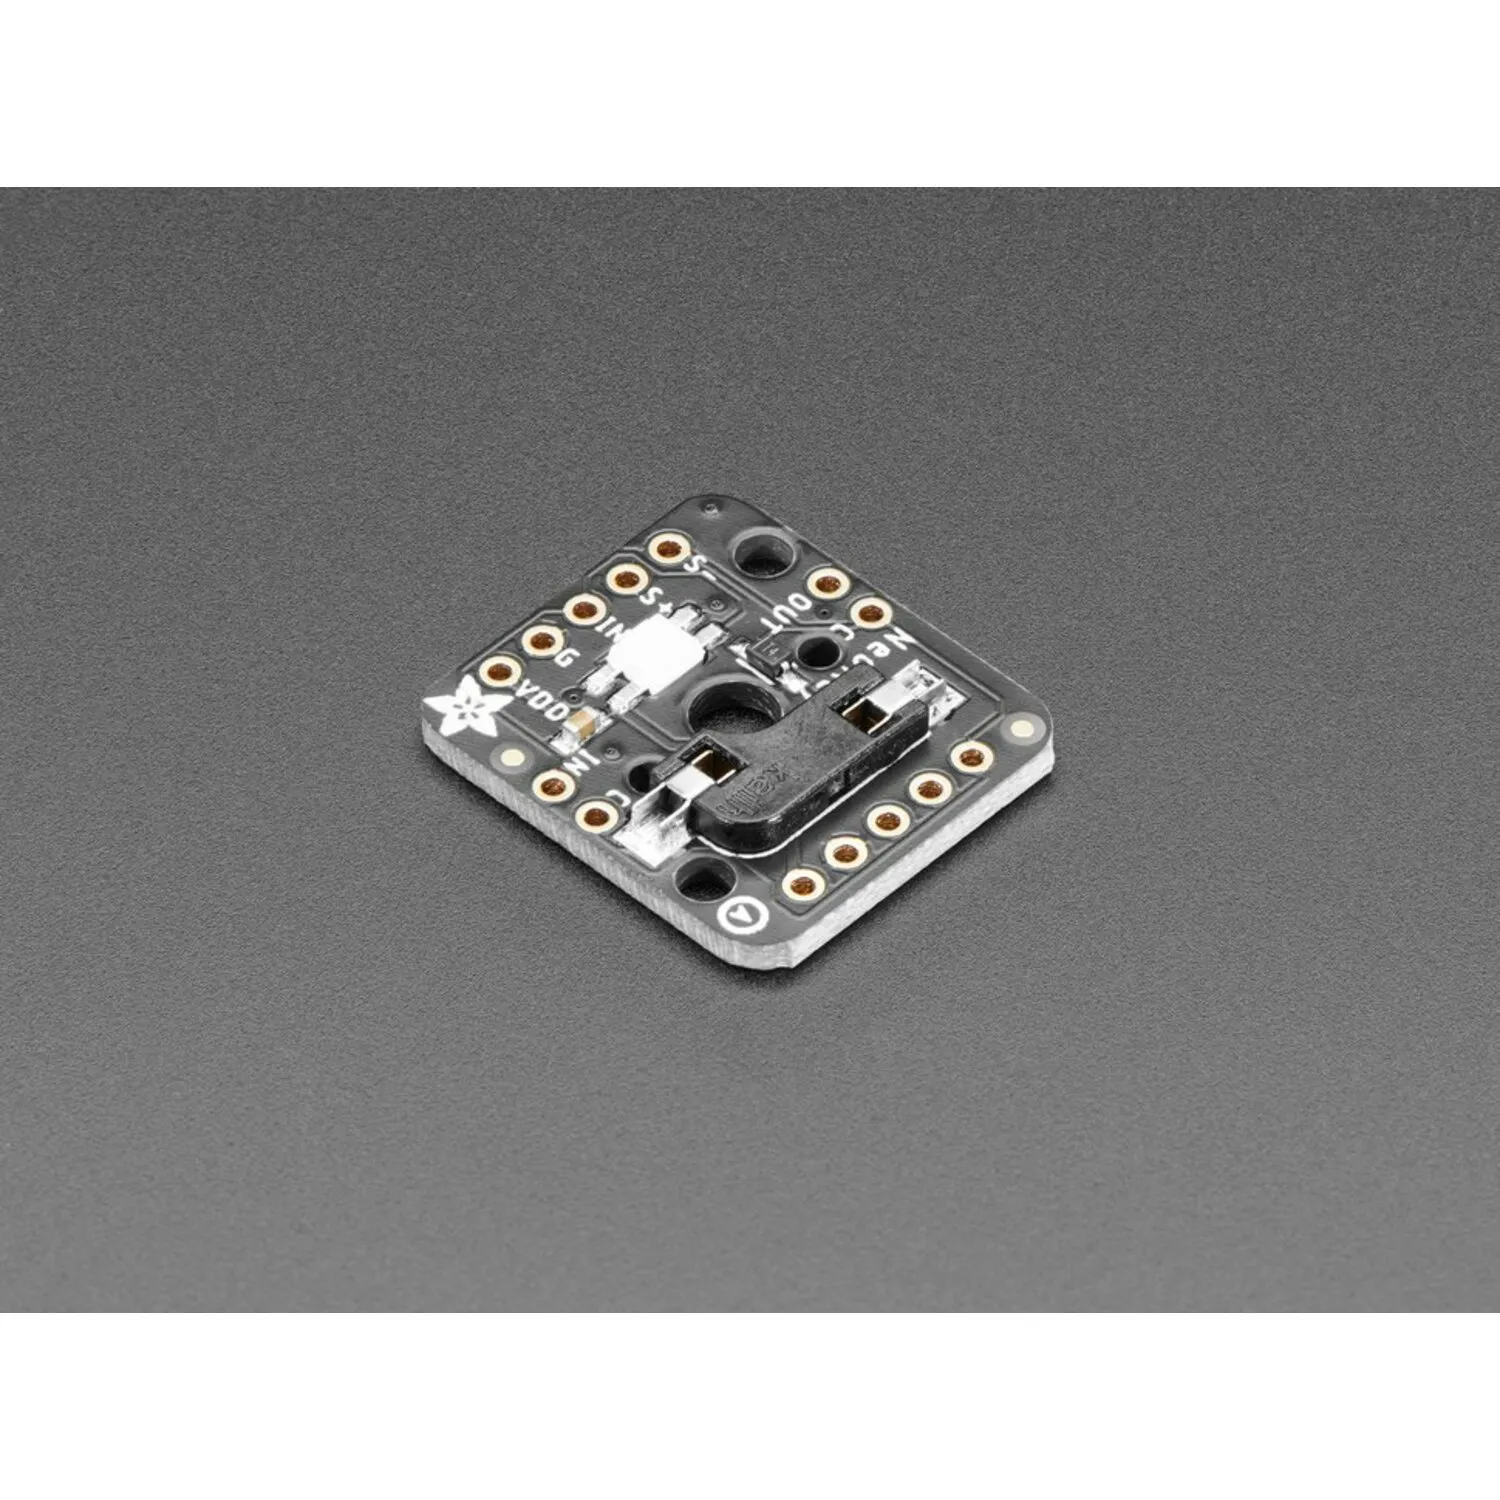 Photo of NeoKey Socket Breakout for Mechanical Key Switches with NeoPixel - For MX Compatible Switches